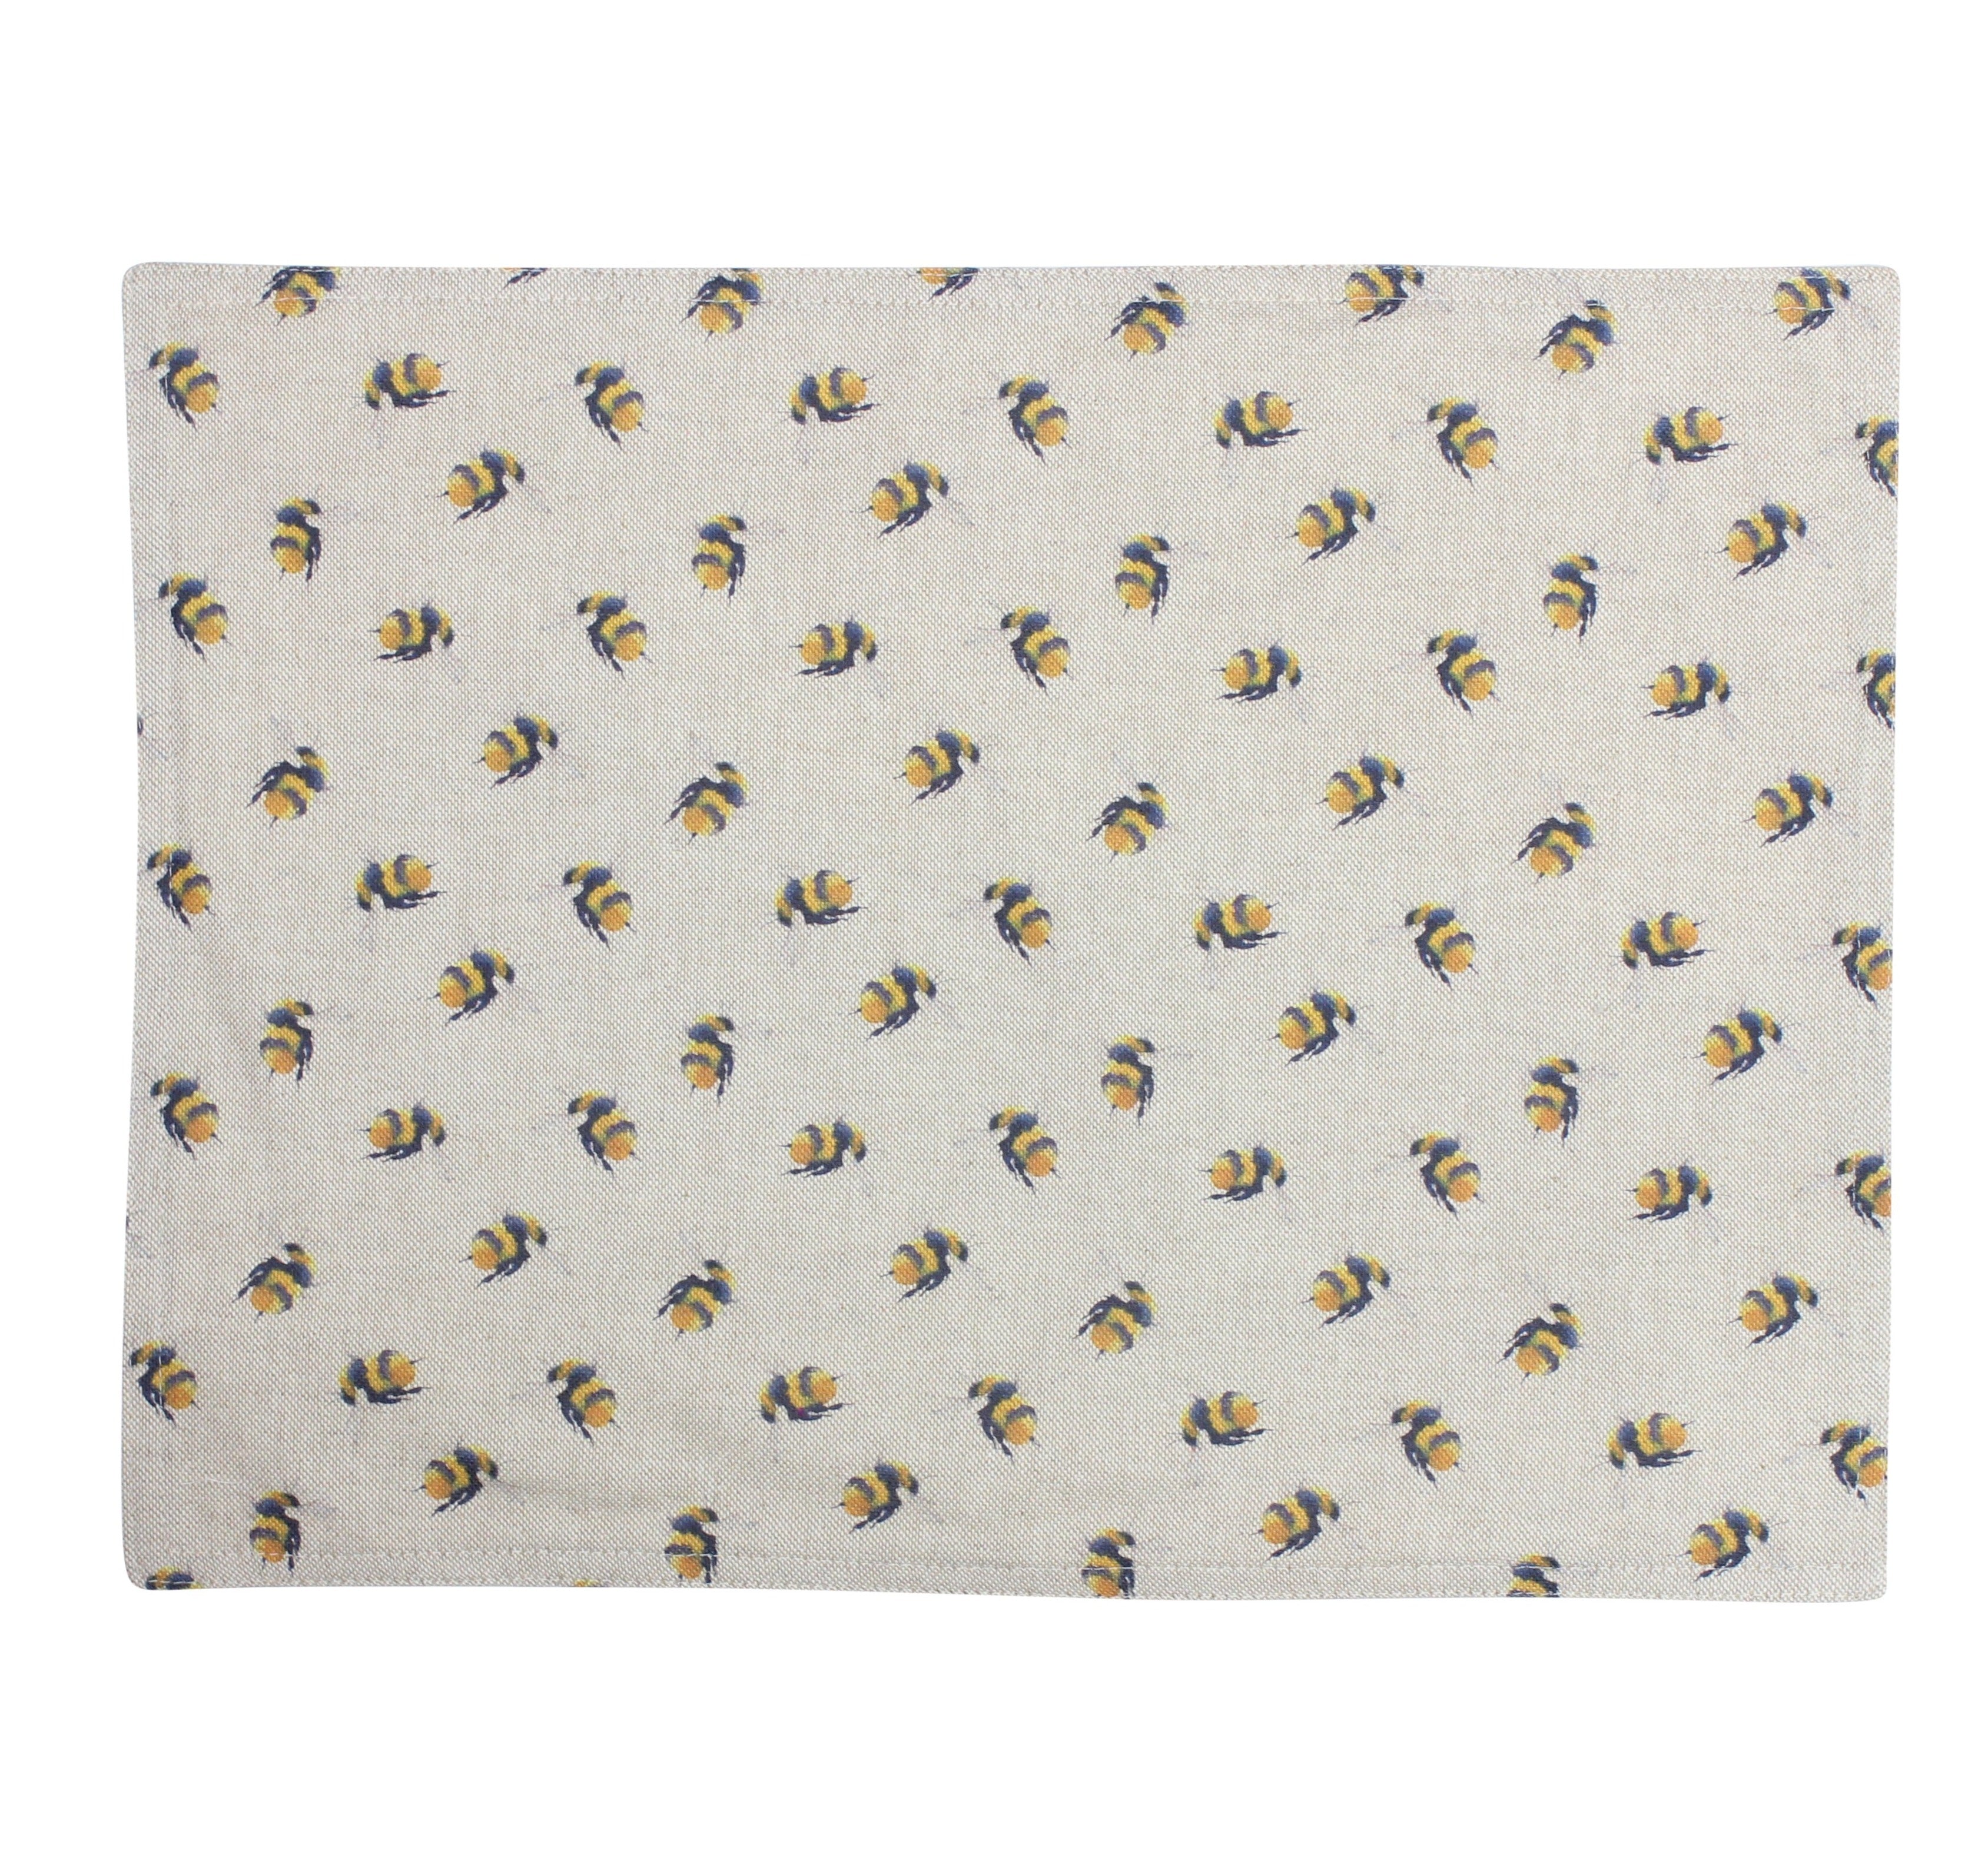 Bumble Bee Fabric Placemat